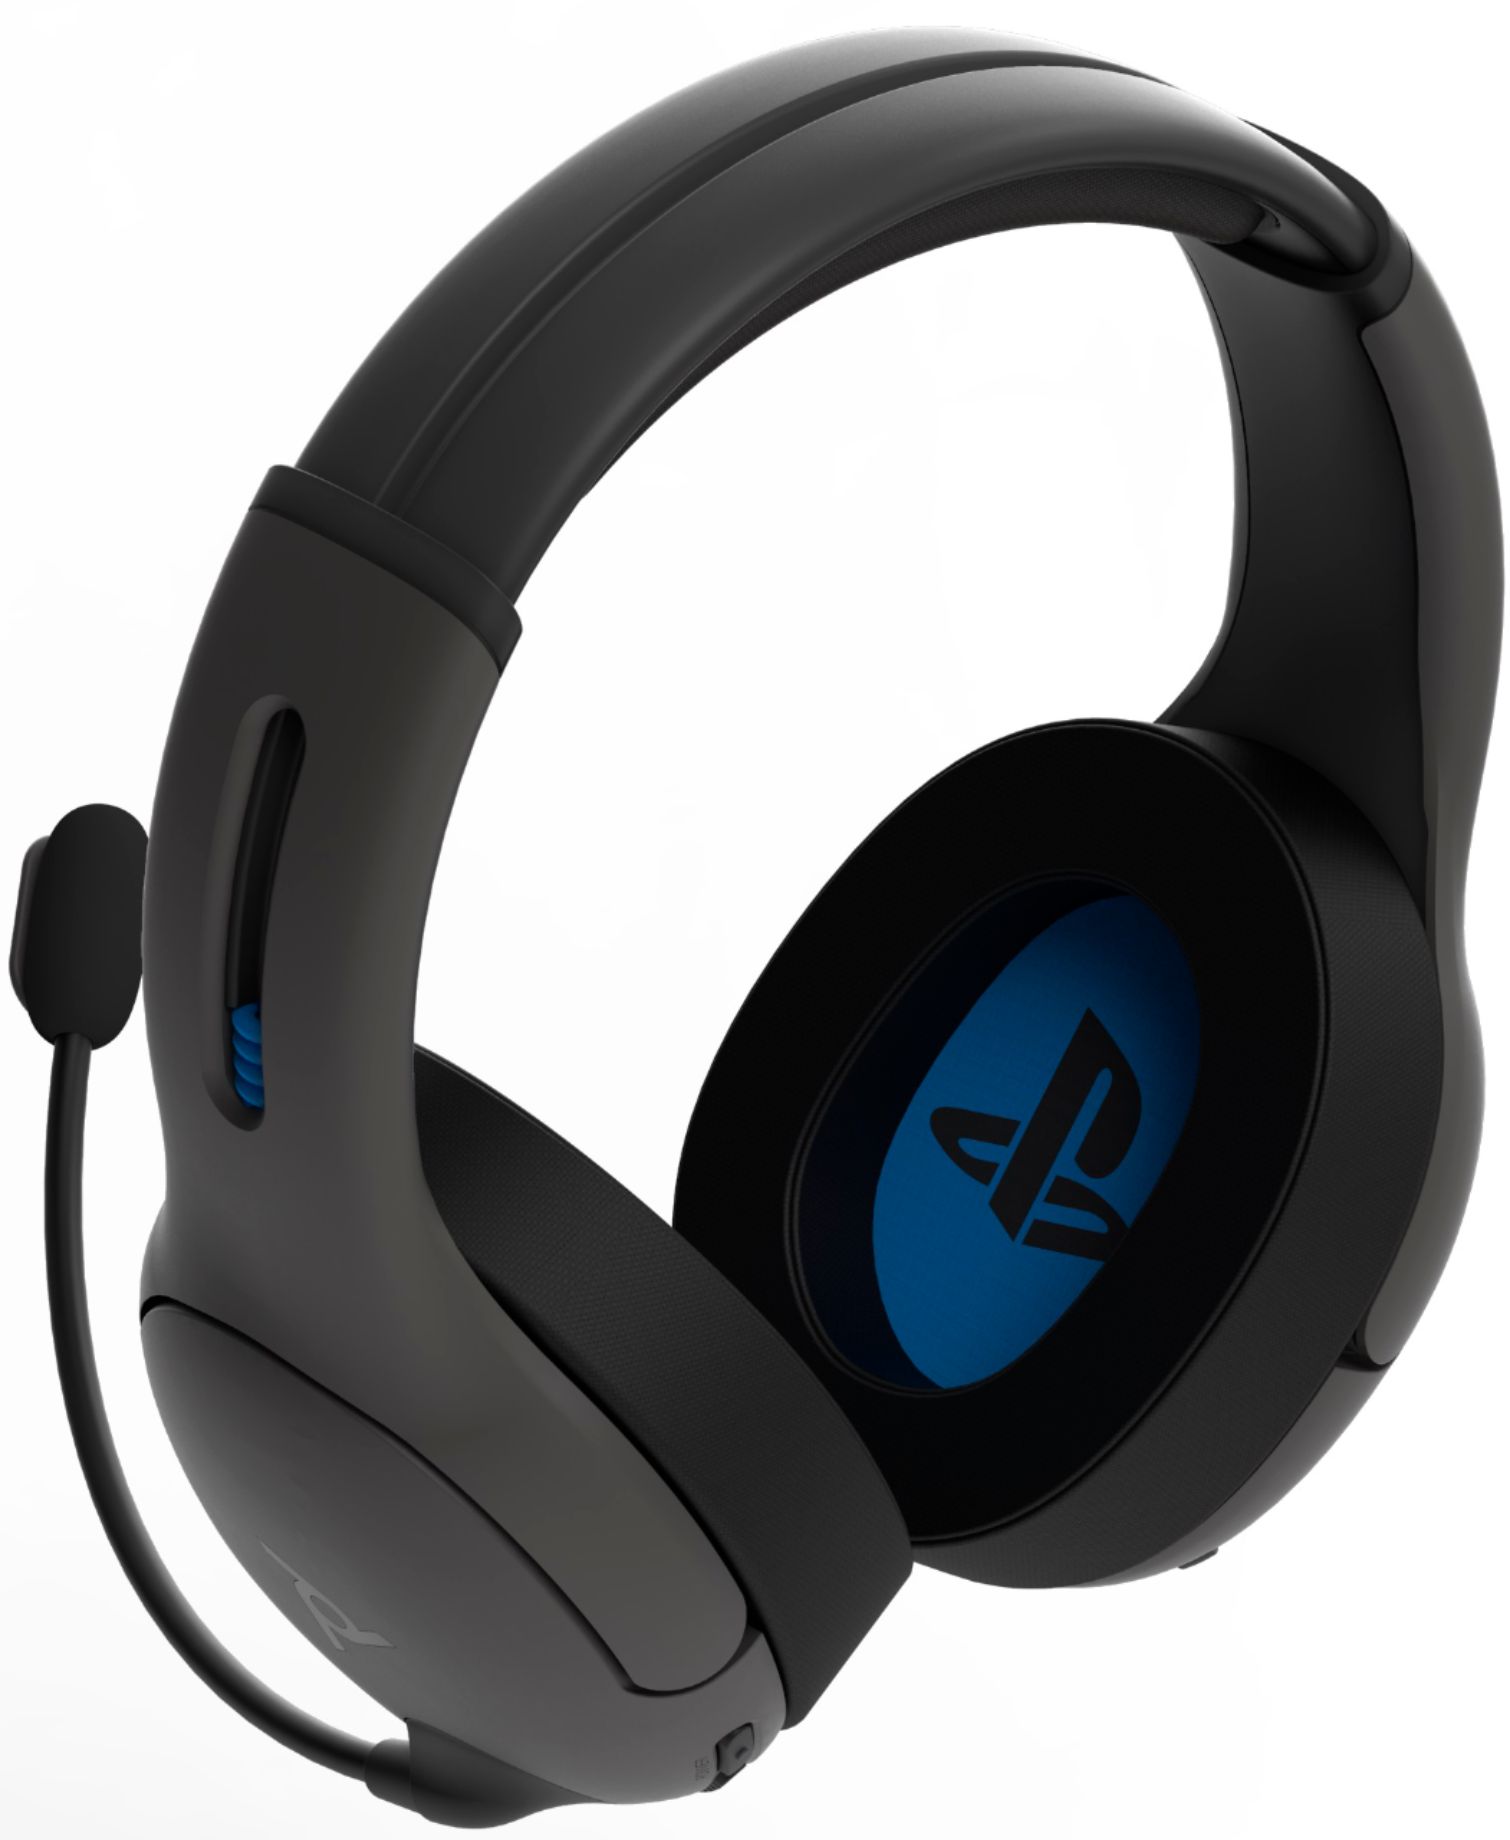 pdp gaming lvl50 wireless stereo headset for playstation 4